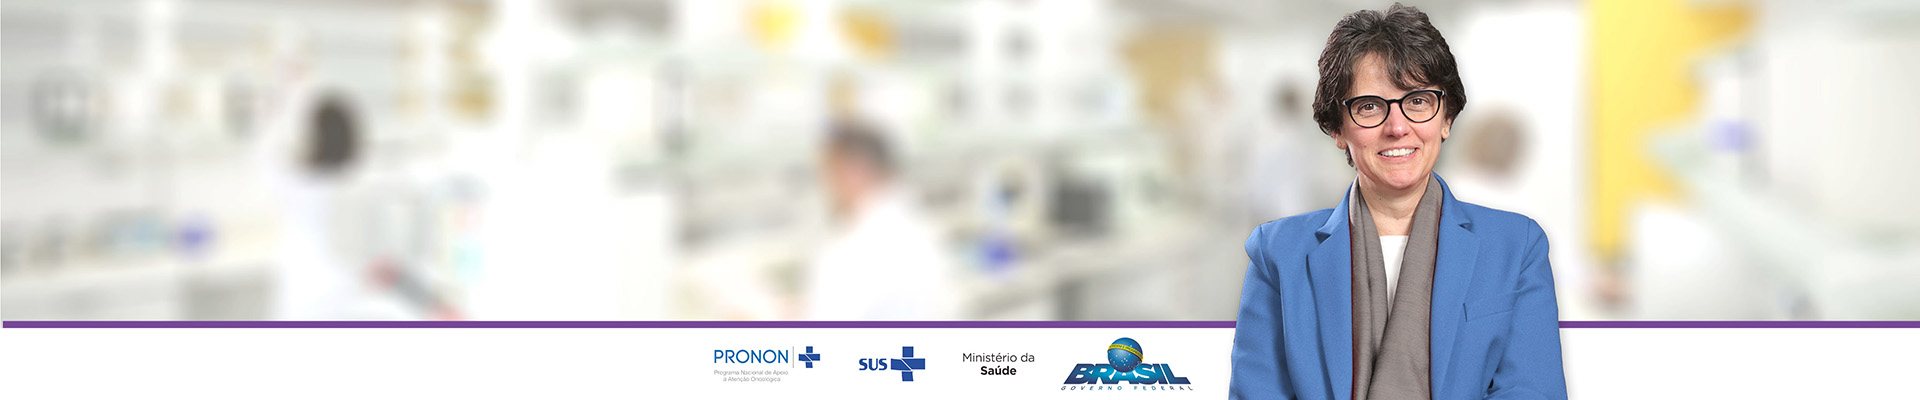 Pesquisa%2bclinica banner